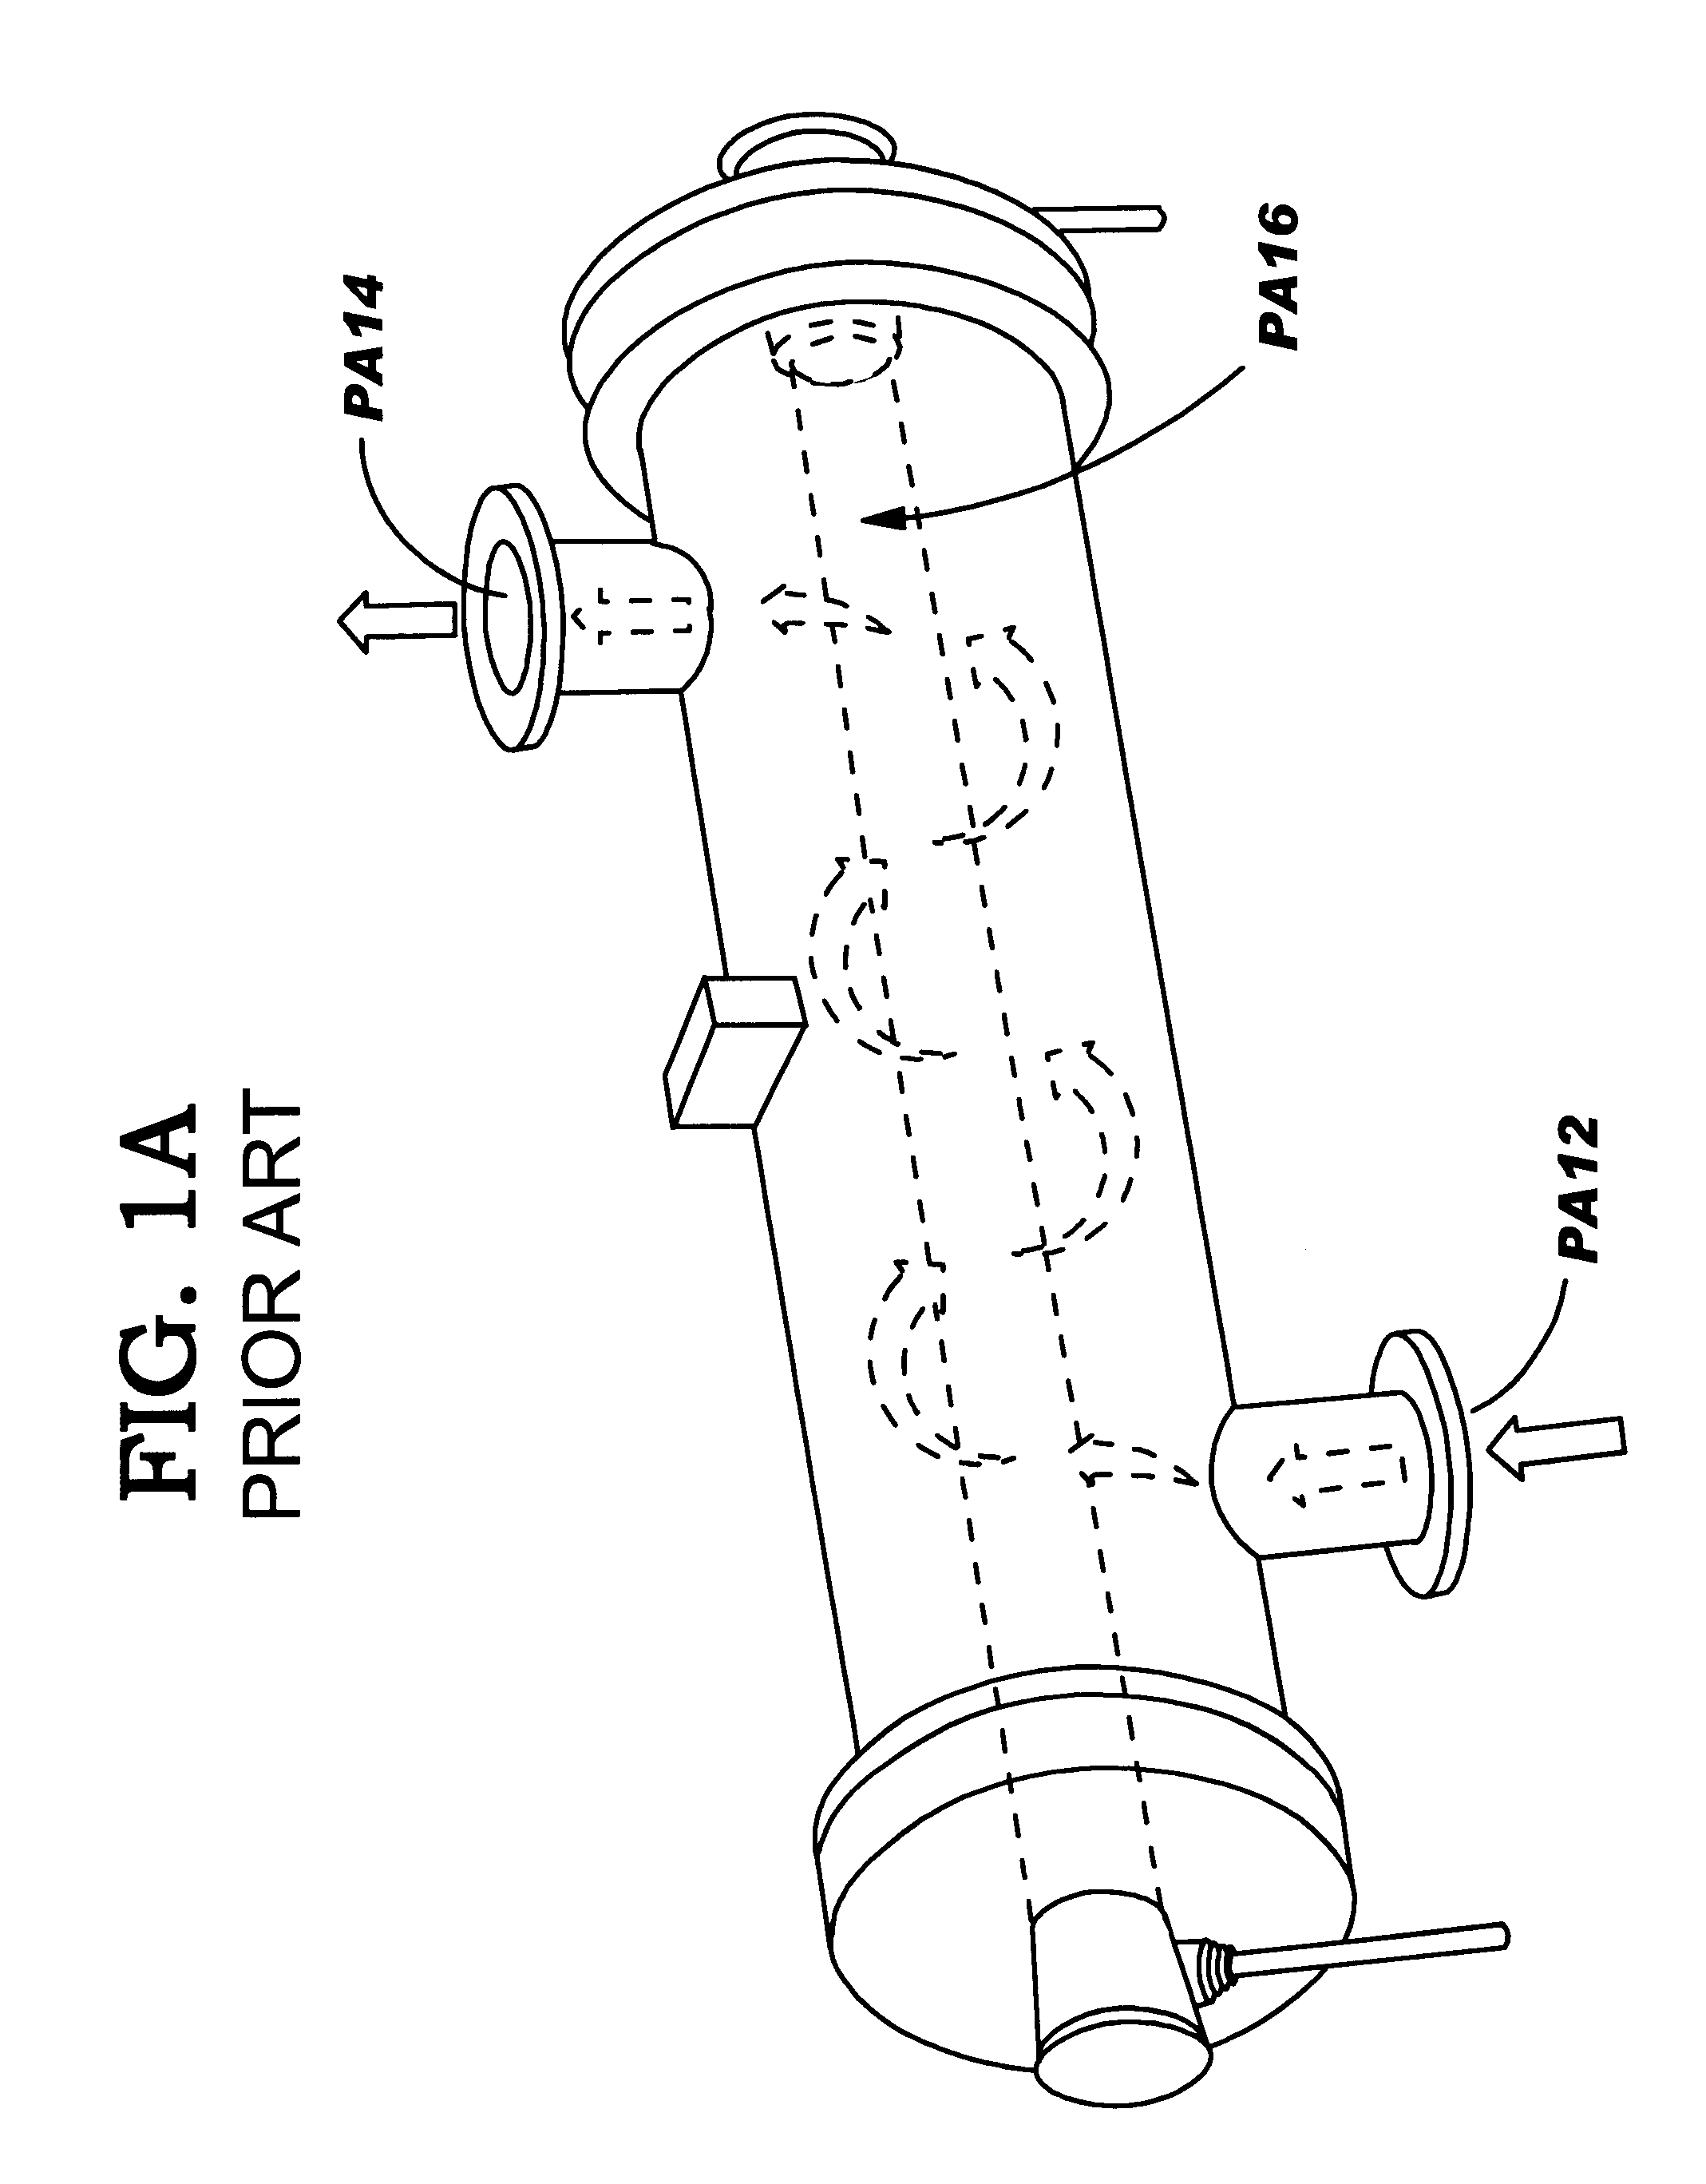 Drinking water UV disinfection system and method